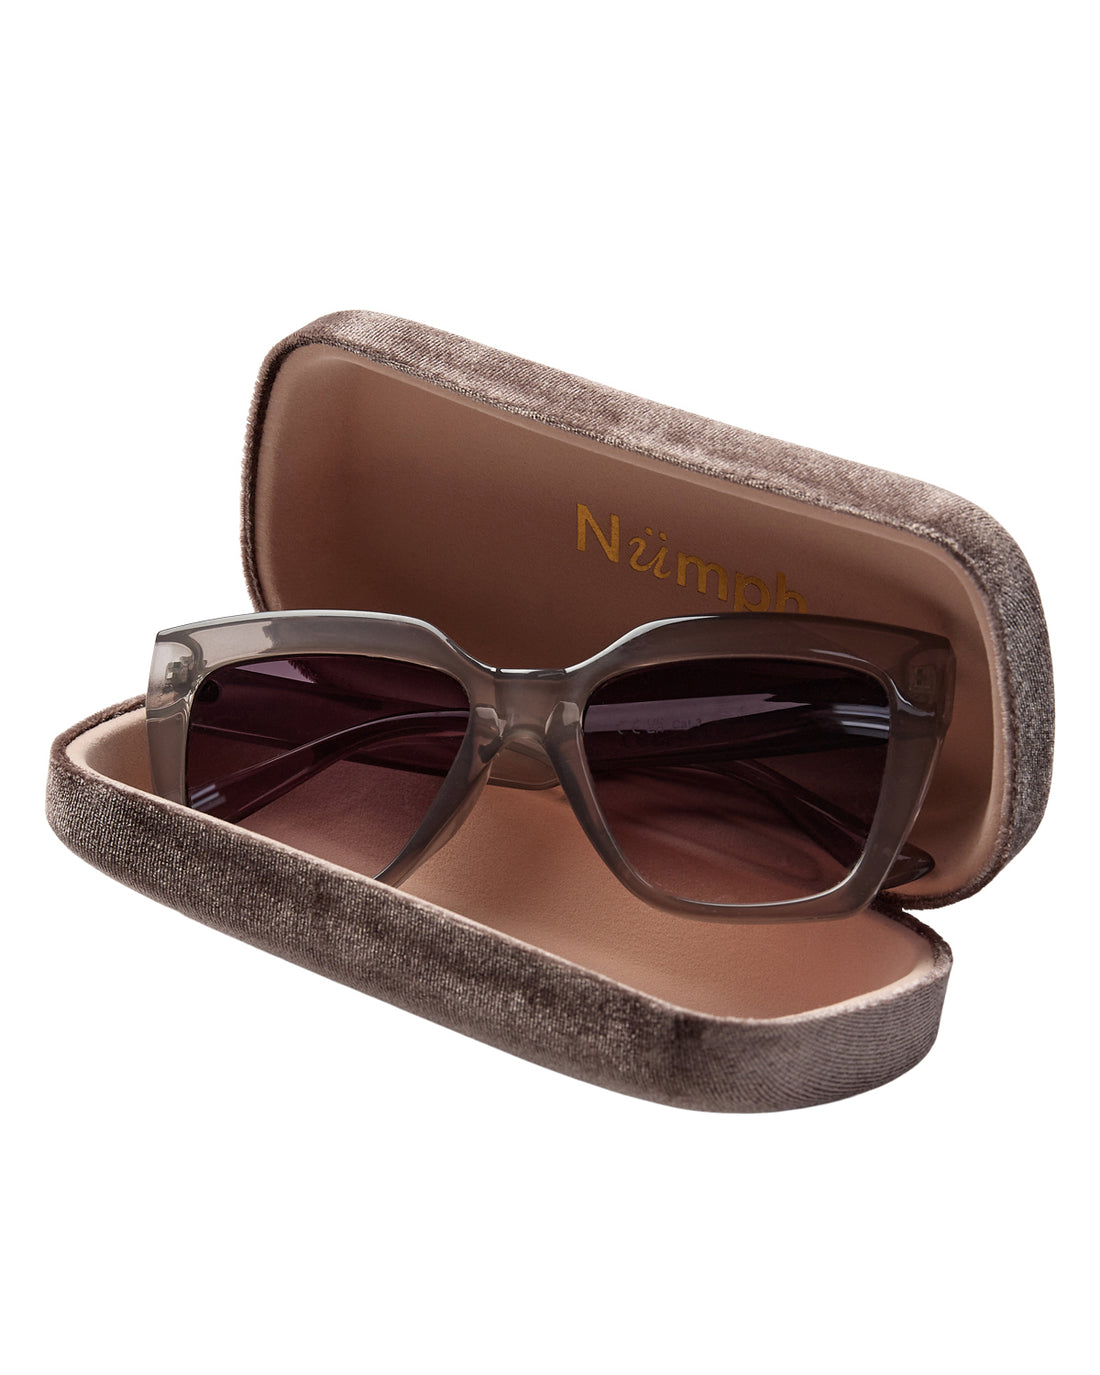 Nuflair Light Grey Sunglasses in Shell with Case